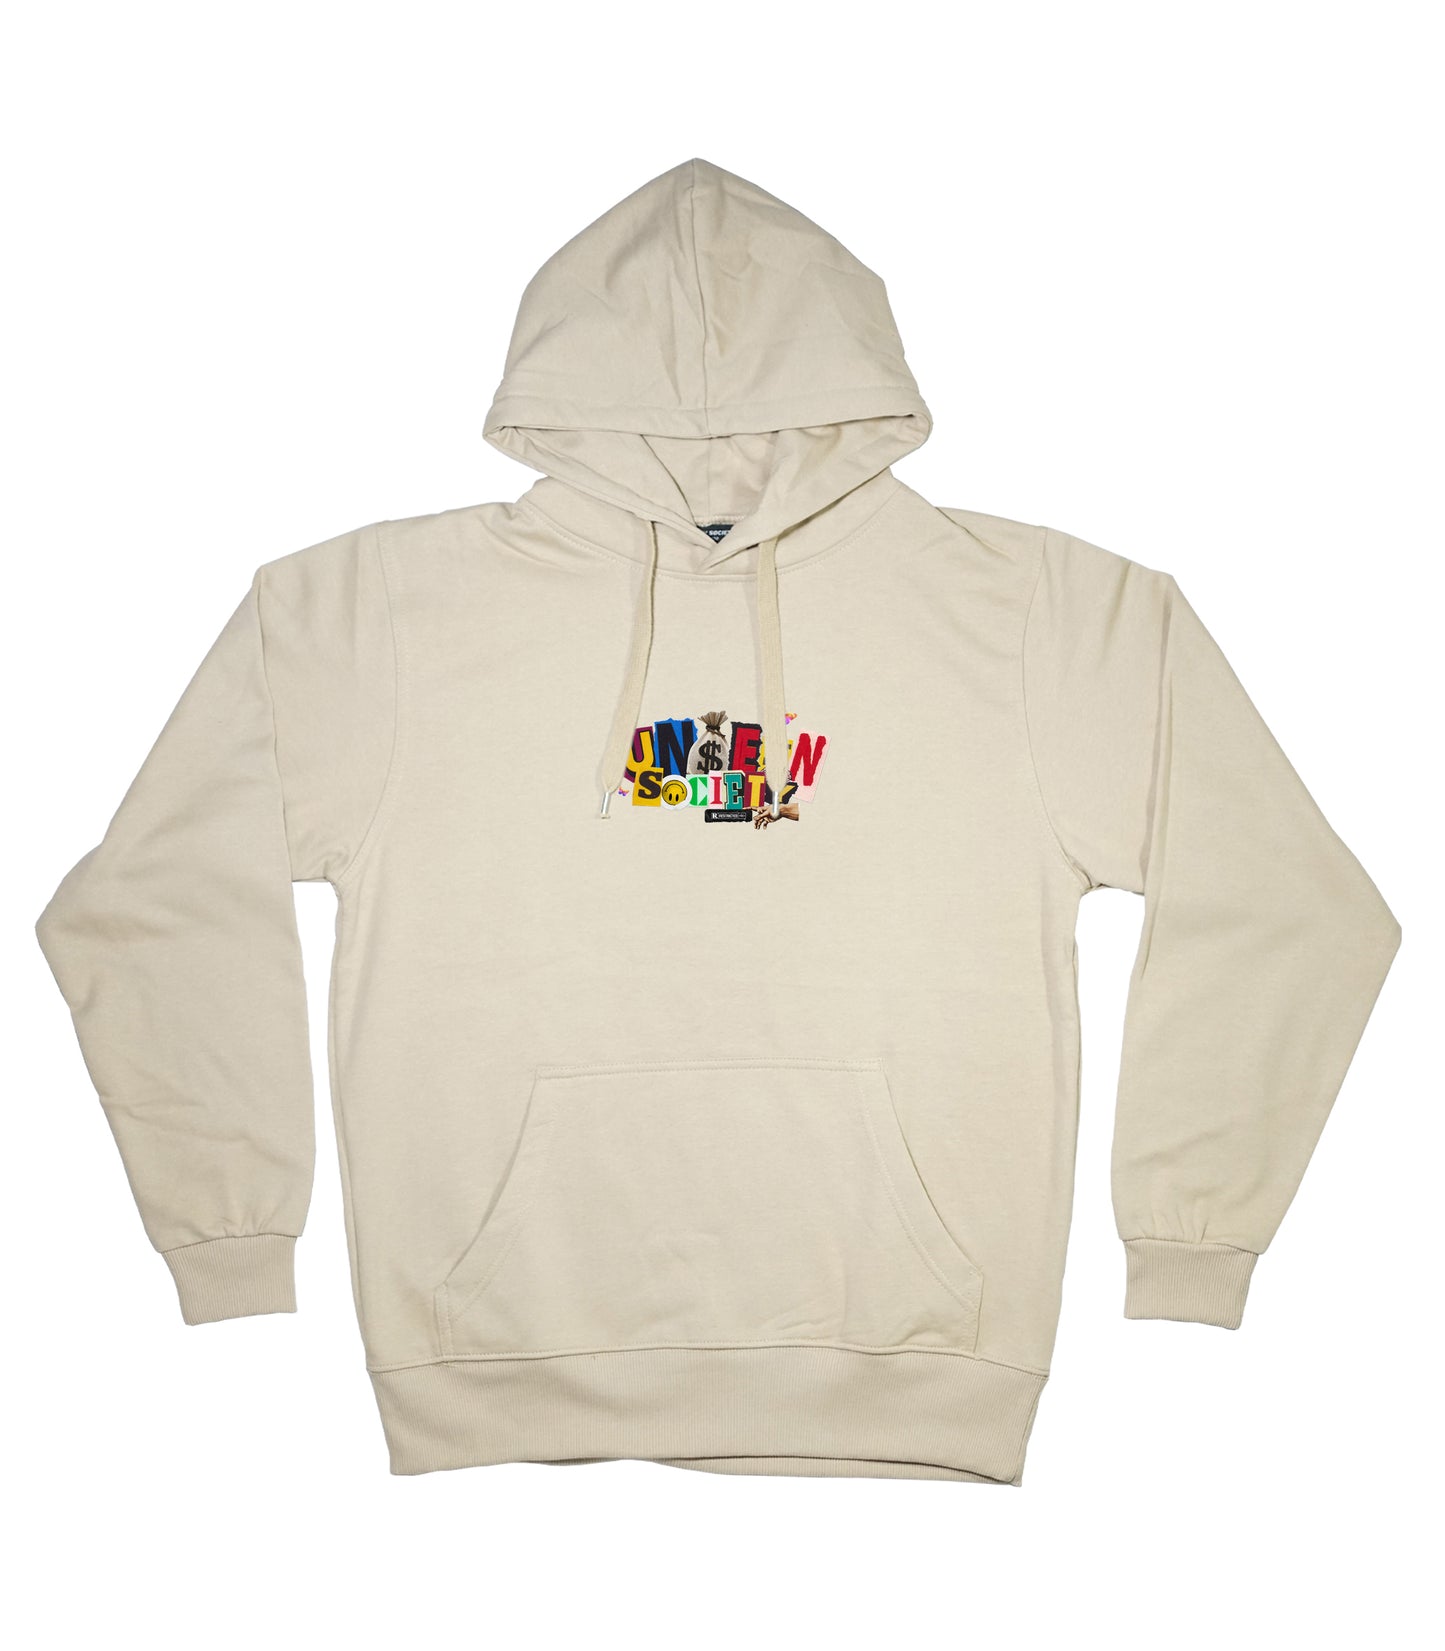 Clipped hoodie